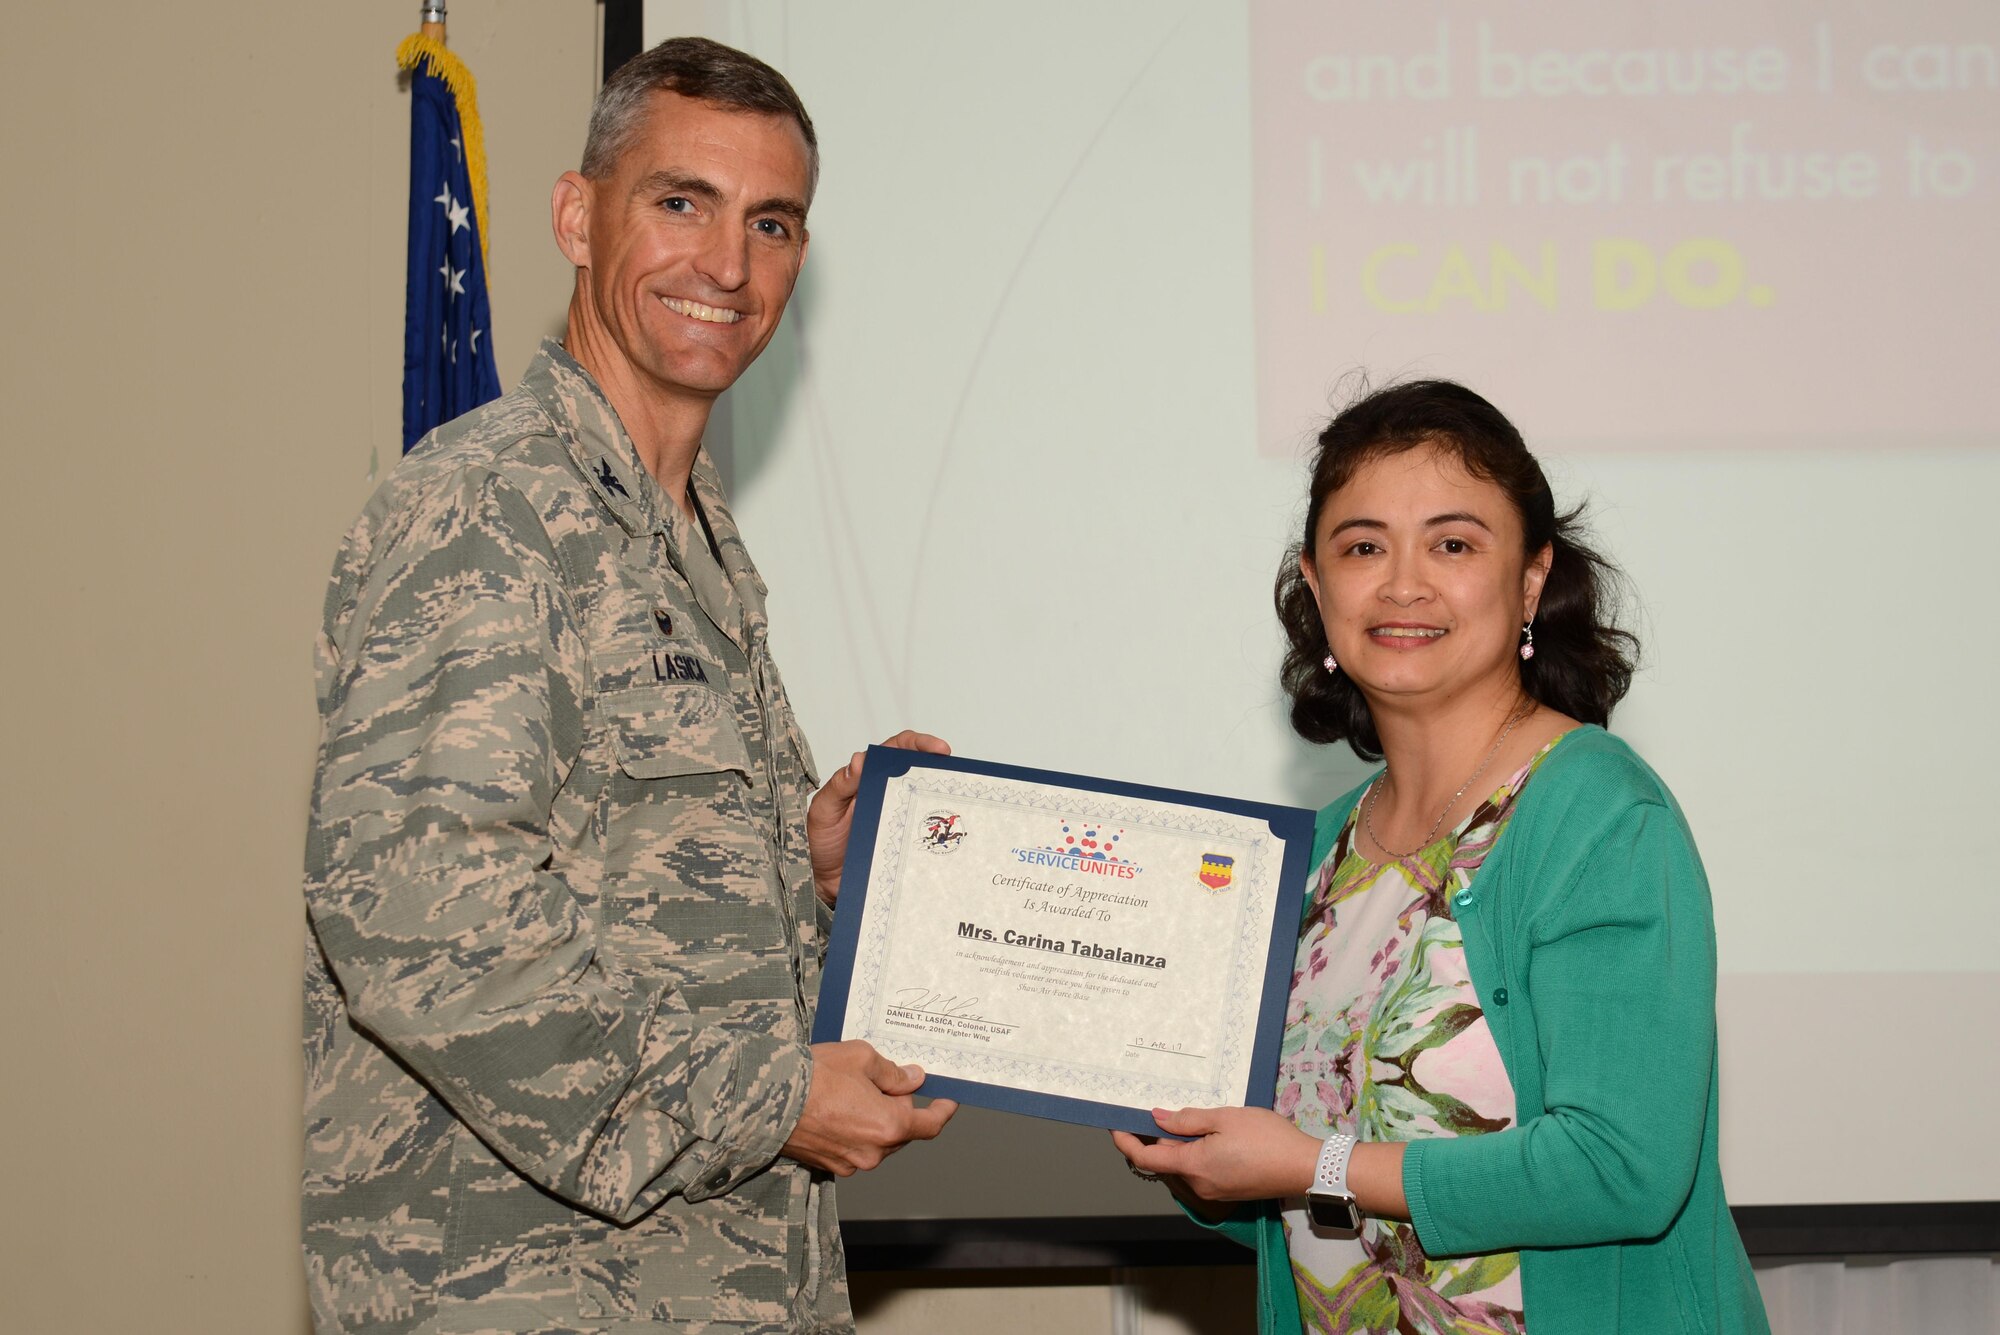 U.S. Air Force Col. Daniel Lasica, 20th Fighter Wing commander, presents Maria Carina Tabalanza, 20th Component Maintenance Squadron executive assistant, with a certificate of appreciation at Shaw Air Force Base, S.C., April 13, 2017. Tabalanza was recognized for her efforts as a volunteer and 20th Fighter Wing Chapel Sunday school teacher. (U.S. Air Force photo by Airman 1st Class Kathryn R.C. Reaves)